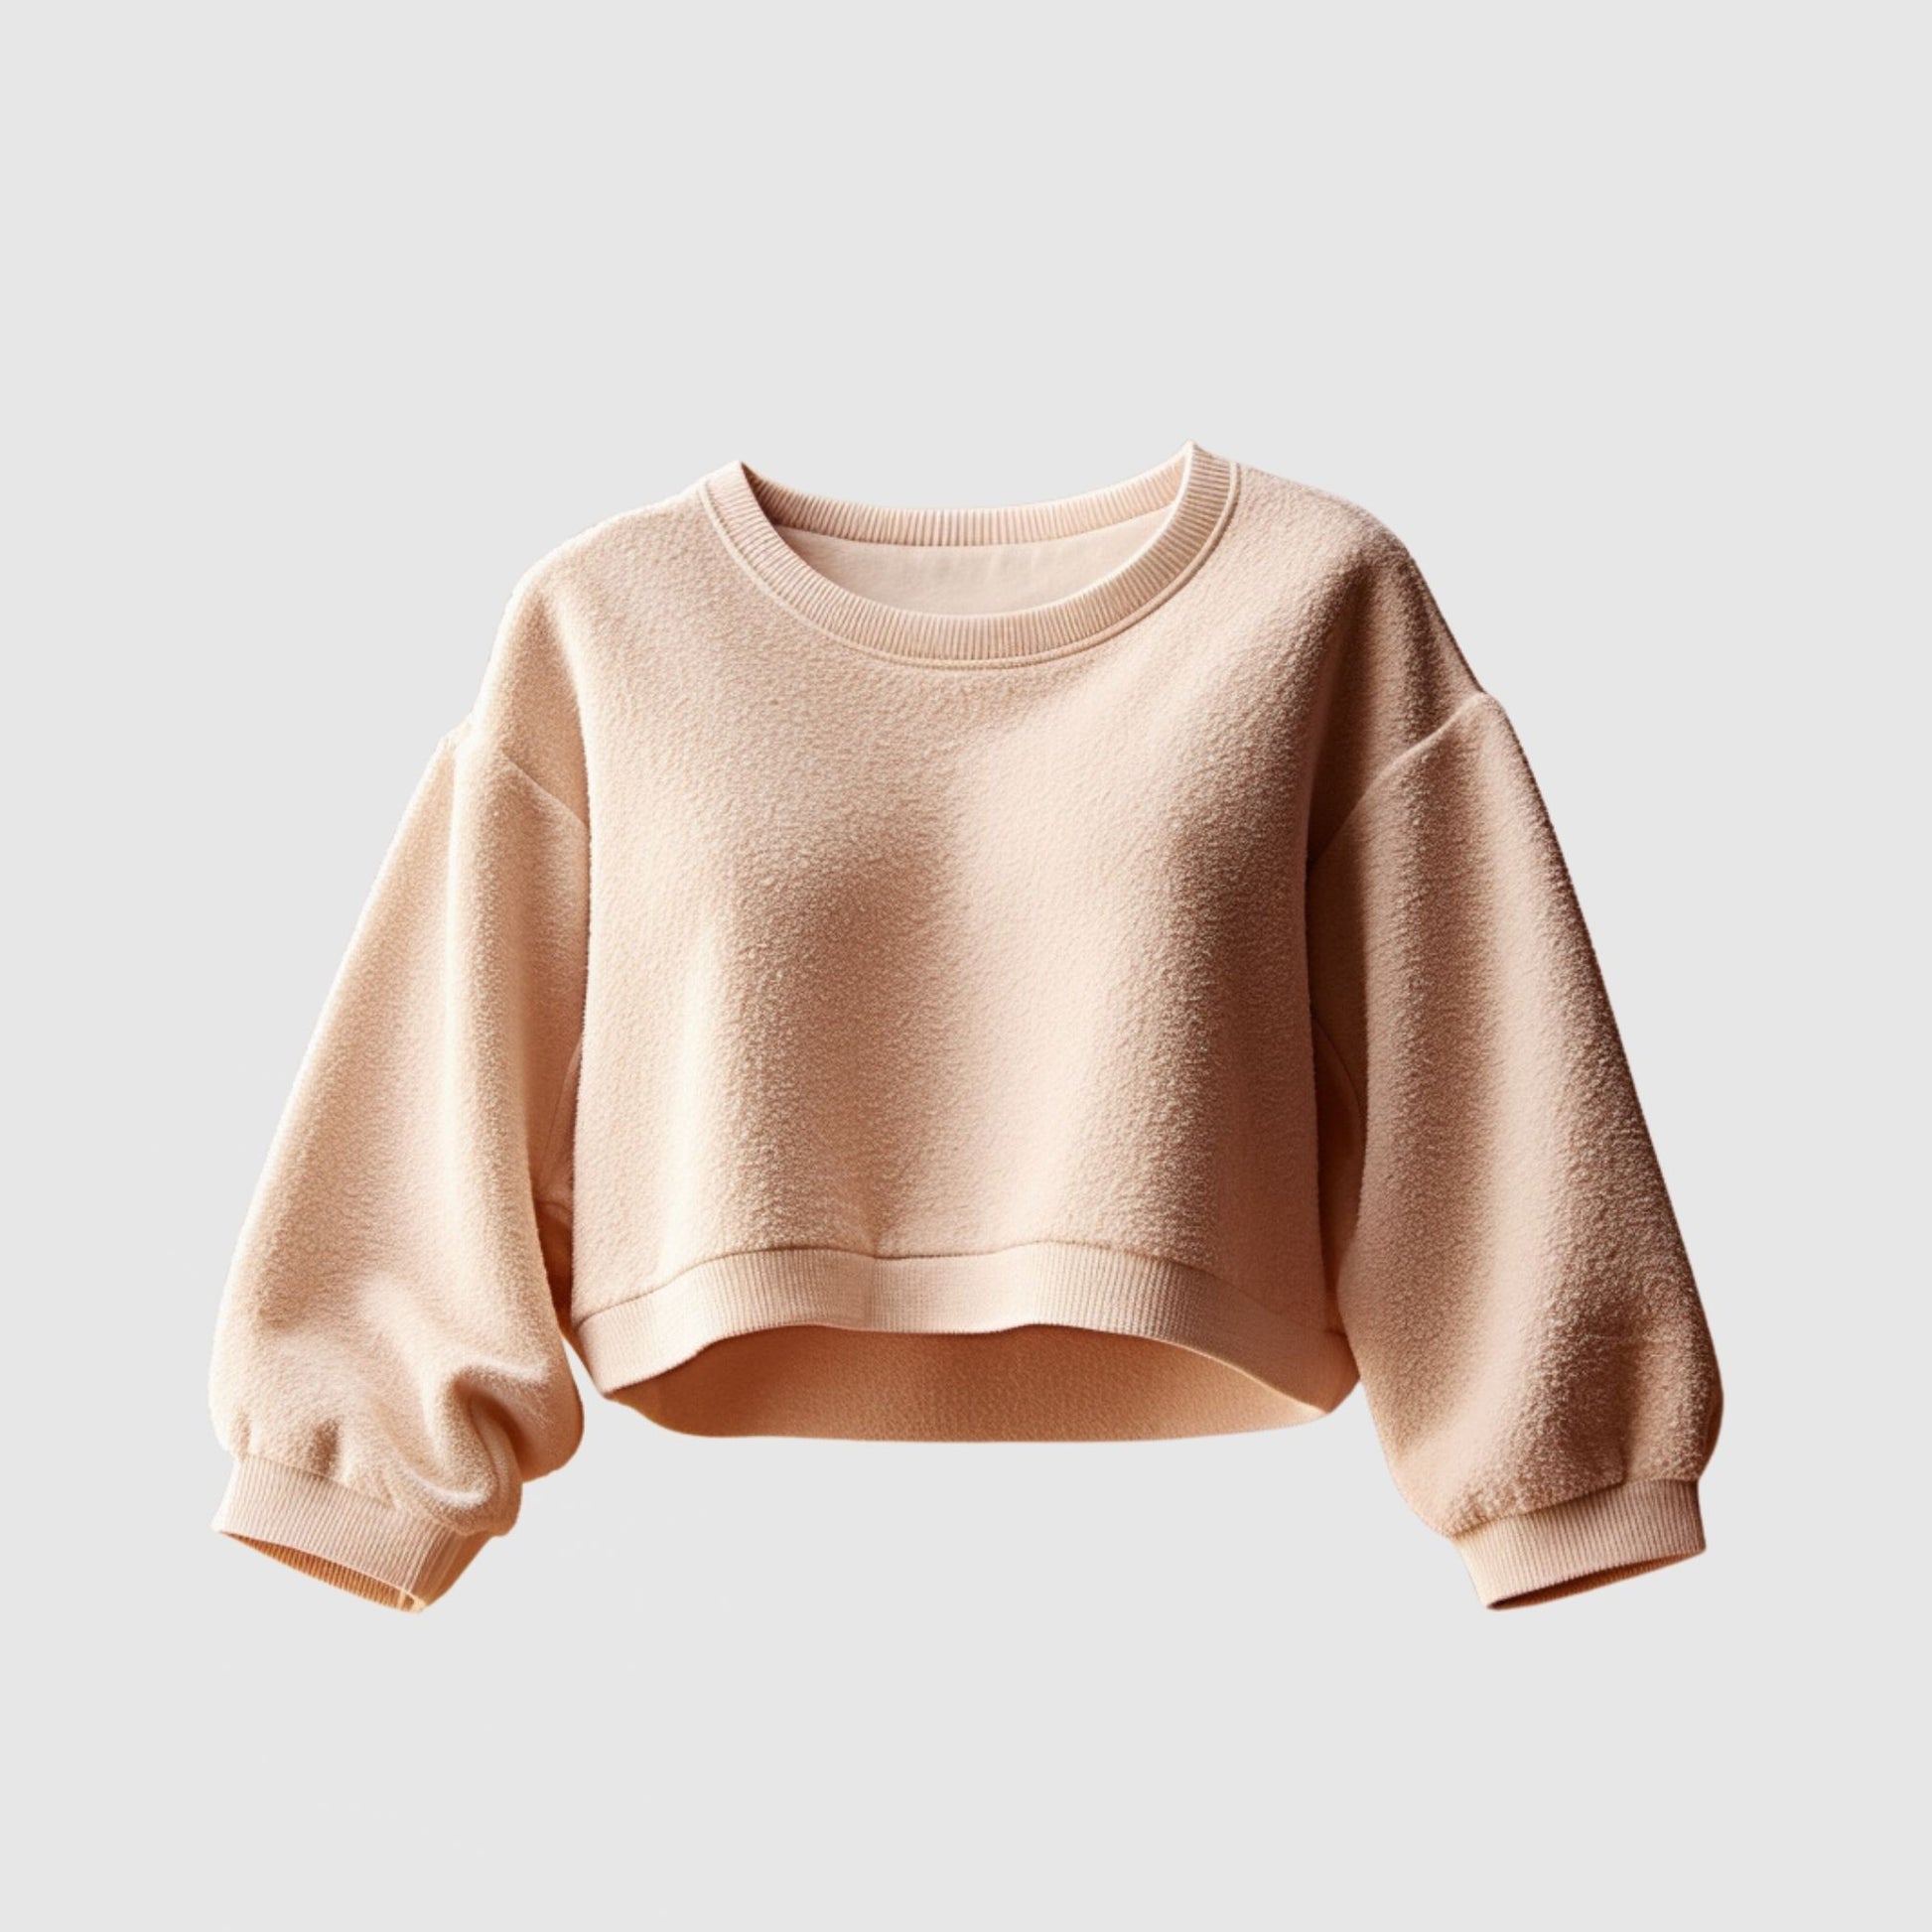 cropped organic cotton fleece top made in Canada 